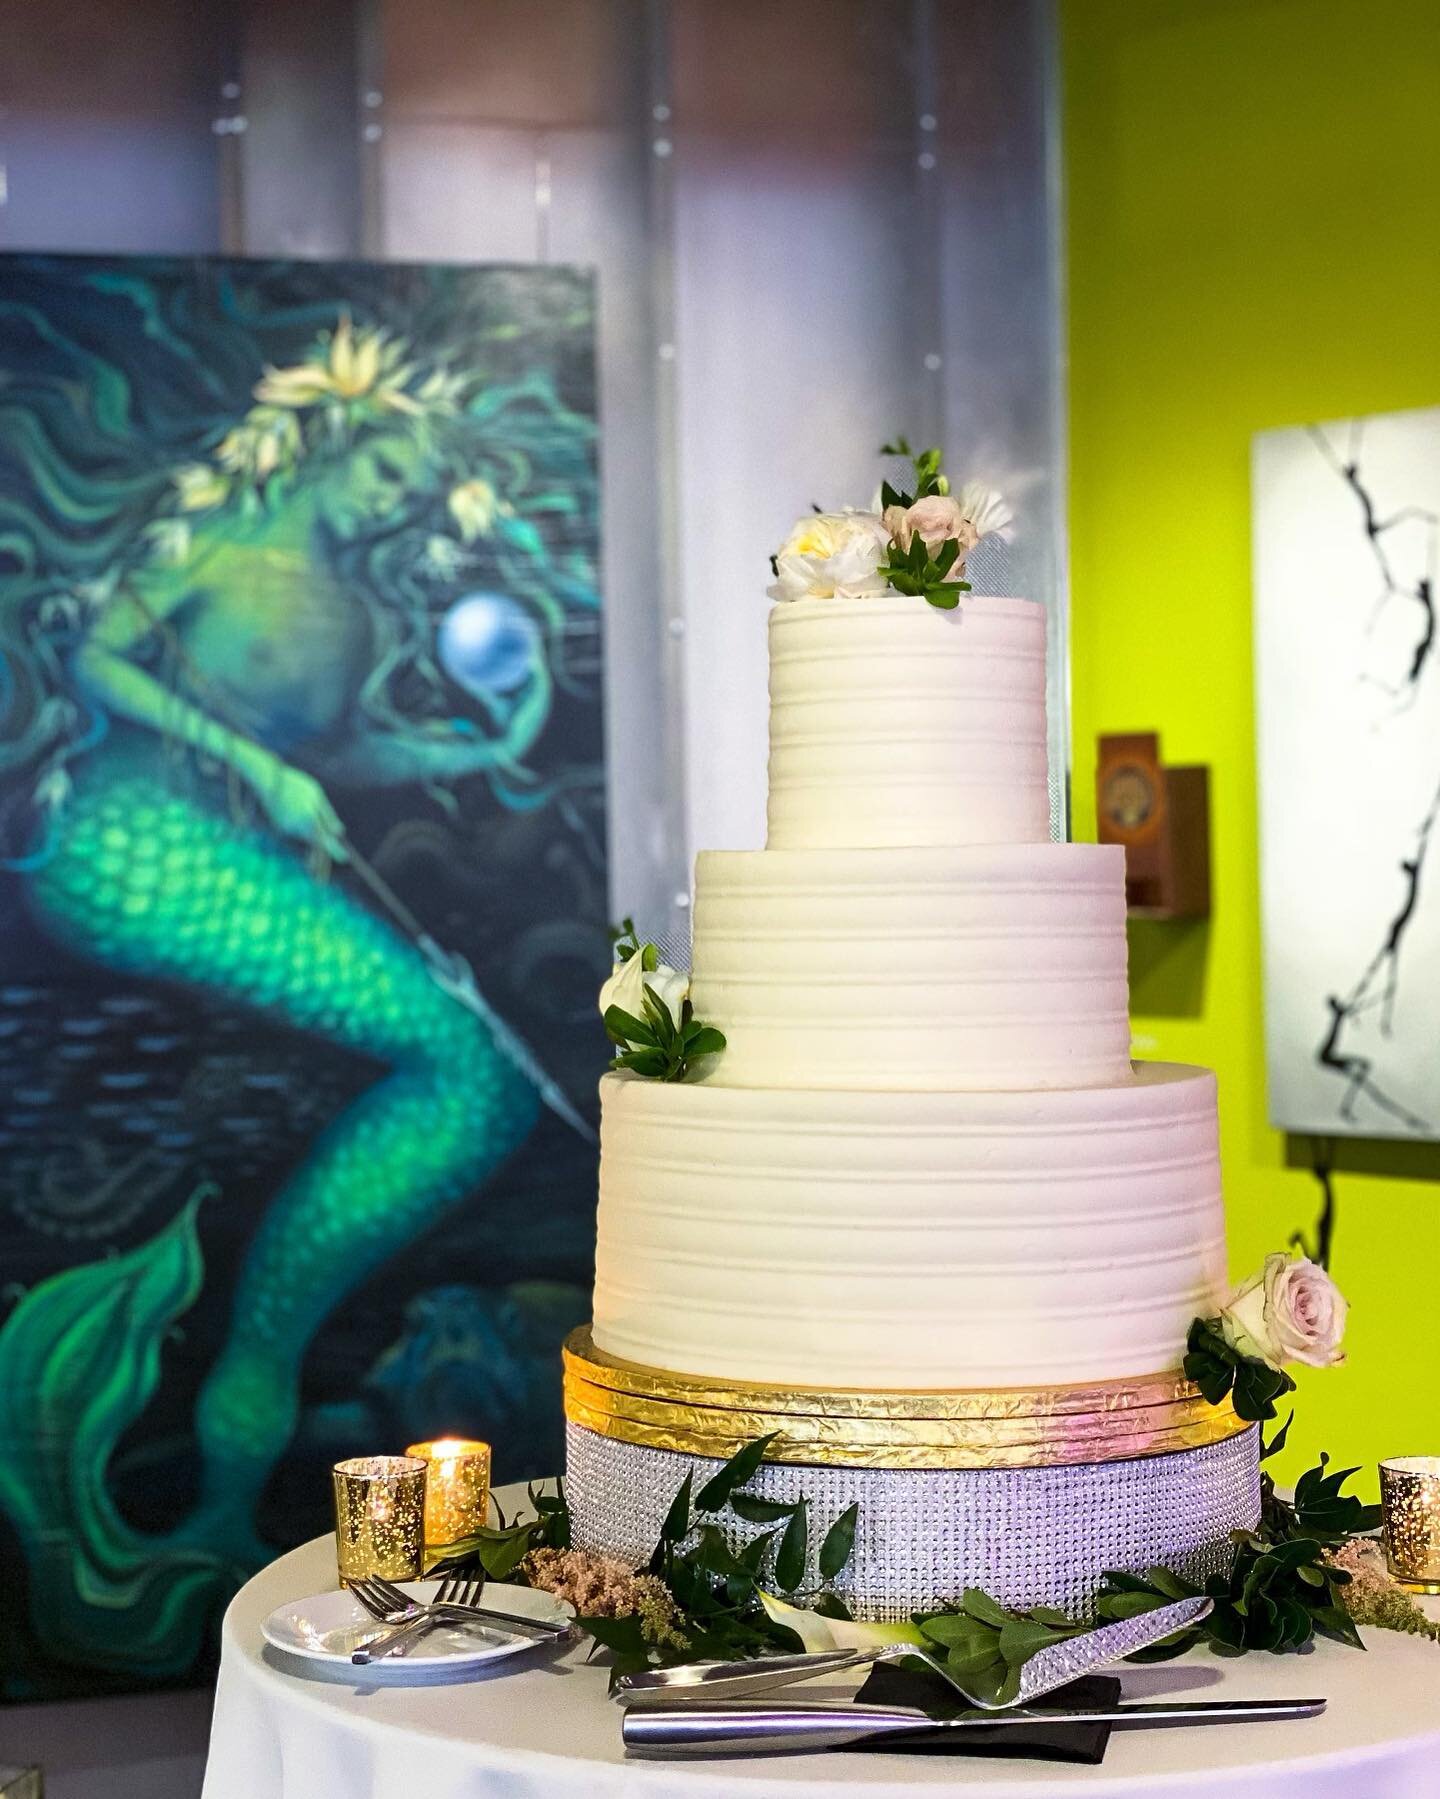 Let&rsquo;s talk cake please!! 

We loved this @kelseyelizabethcakes especially against the stunning backdrop of local artist @lherbold paintings. Beautifully curated artwork is just another one of the many perks of hosting your wedding in one of the